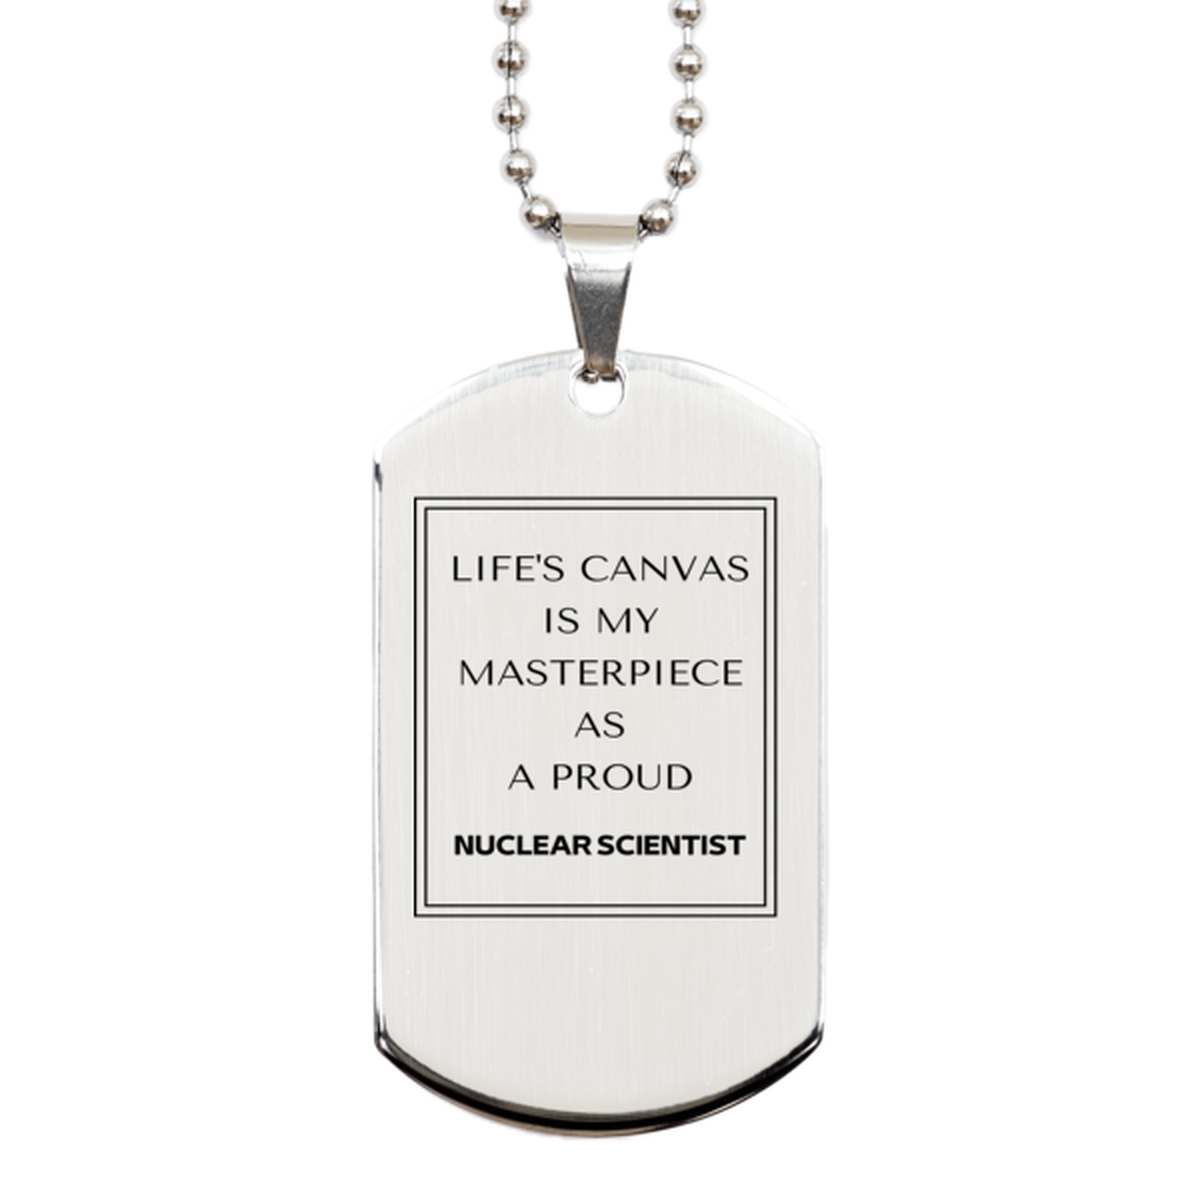 Proud Nuclear Scientist Gifts, Life's canvas is my masterpiece, Epic Birthday Christmas Unique Silver Dog Tag For Nuclear Scientist, Coworkers, Men, Women, Friends